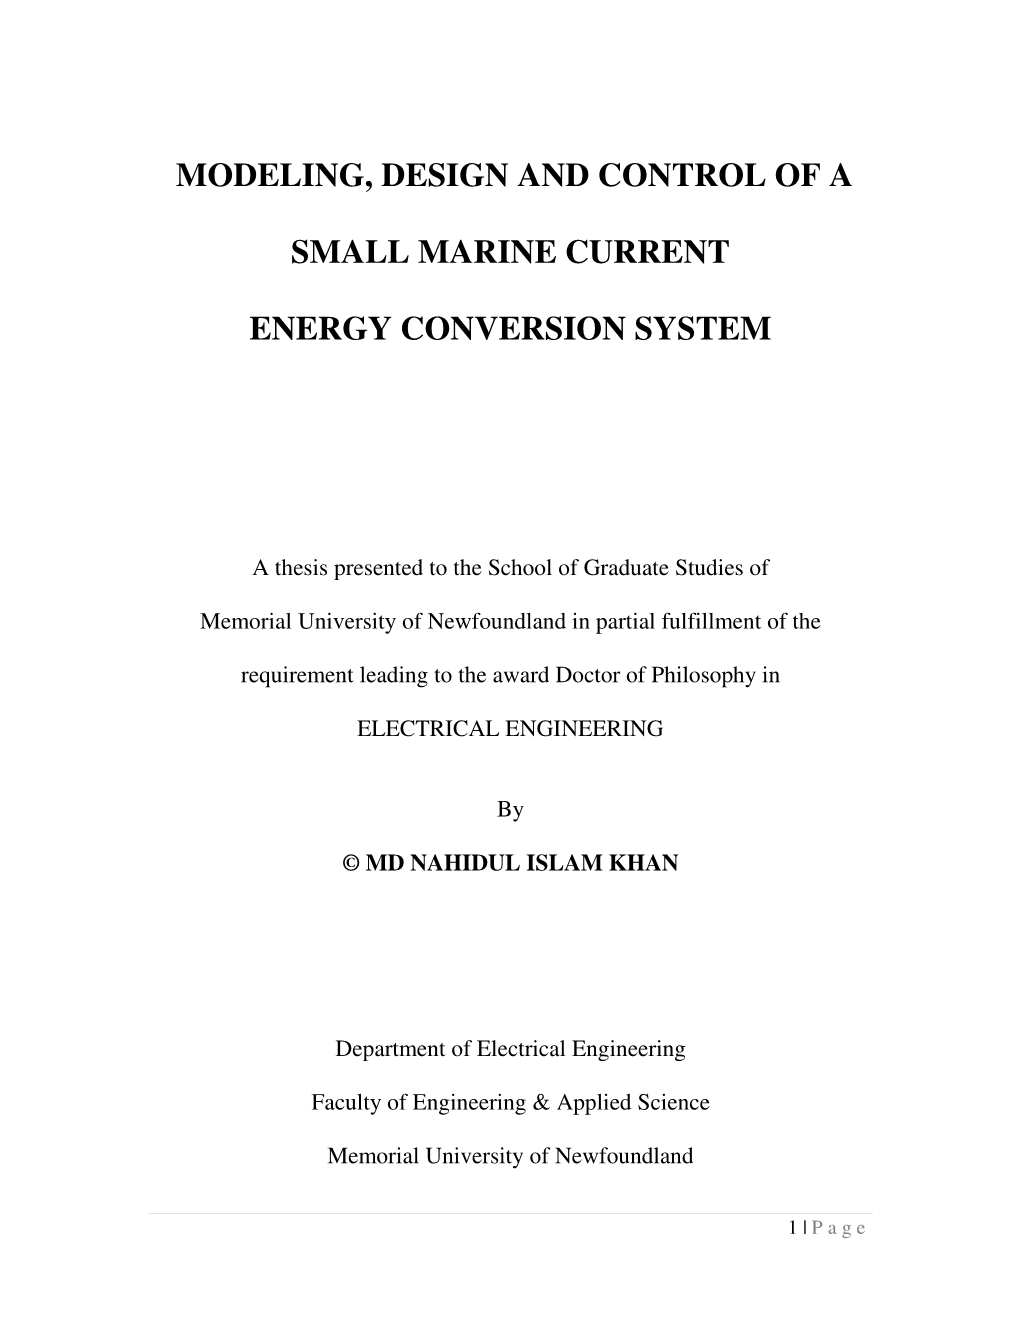 Modeling, Design and Control of a Small Marine Current Energy Conversion System